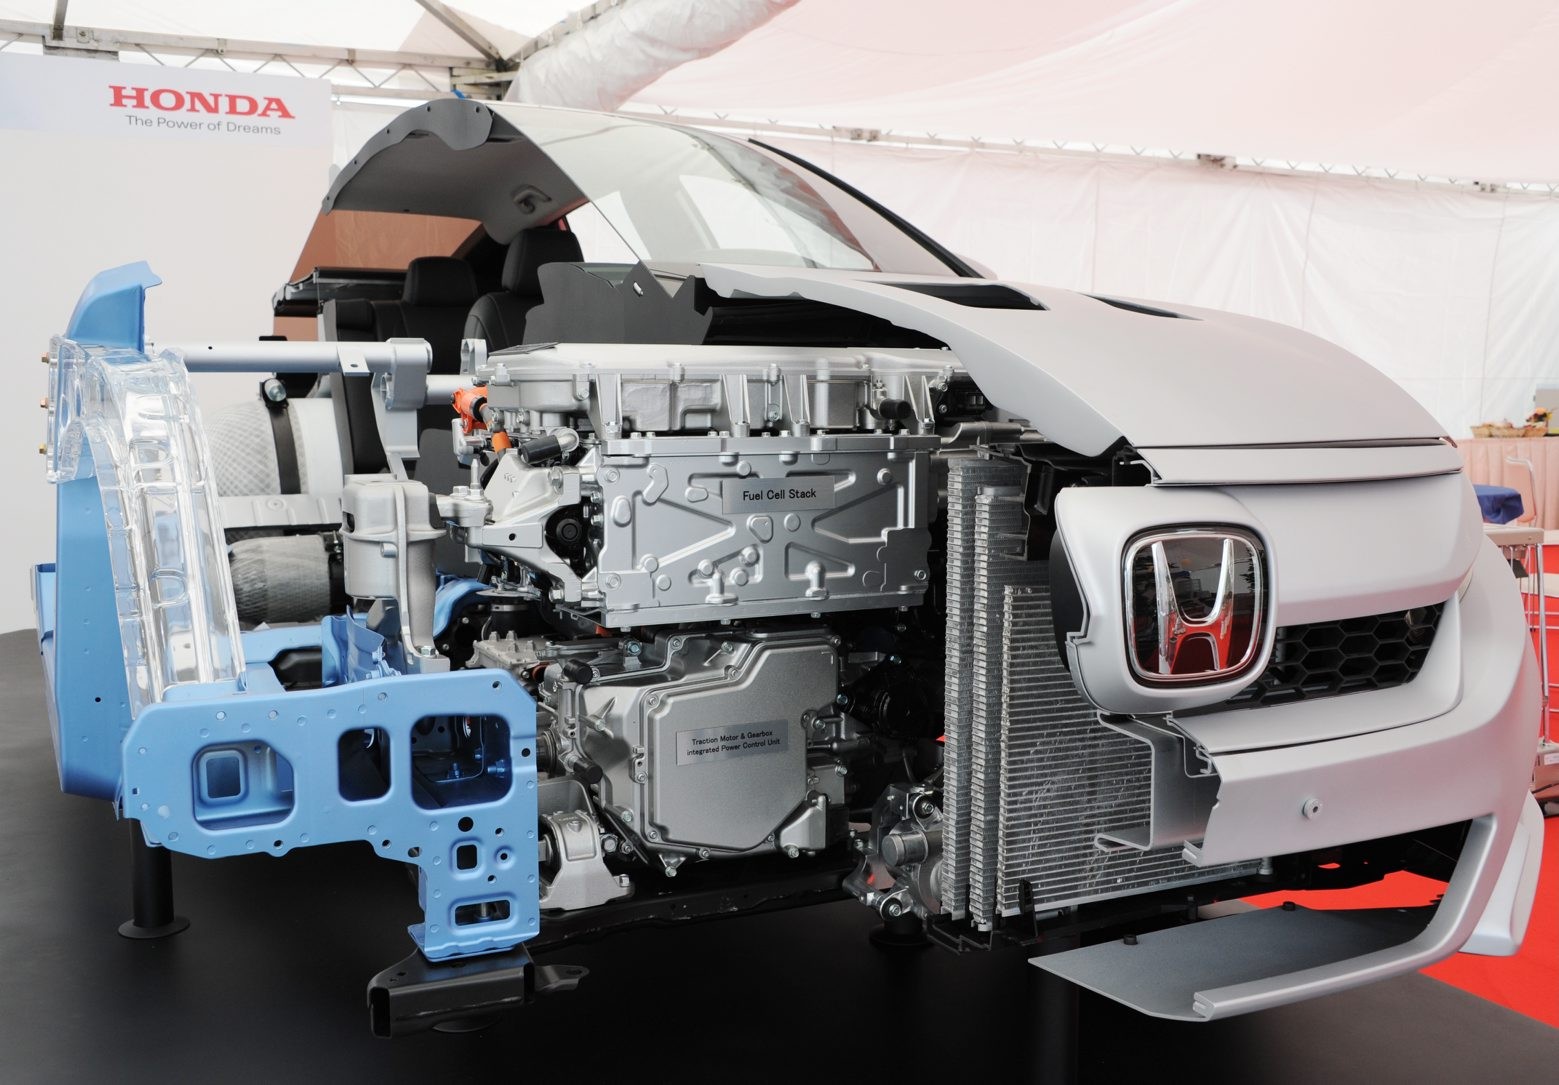 In this photo taken on Saturday, Oct. 24, 2015, the inner structure of Honda Motor Co.'s new fuel cell vehicle is shown to the media at the company's research center in the town of Haga, Tochigi Prefecture, north of Tokyo. Honda on Tuesday, Oct. 27, 2015, unveiled the new FCV, which can travel over 700 kilometers per full hydrogen charge. (Jiji Press/Hiroki Ochimizu) (KEYSTONE/Jiji Press/Hiroki Ochimizu) Japan Honda Fuel Cell Vehicle